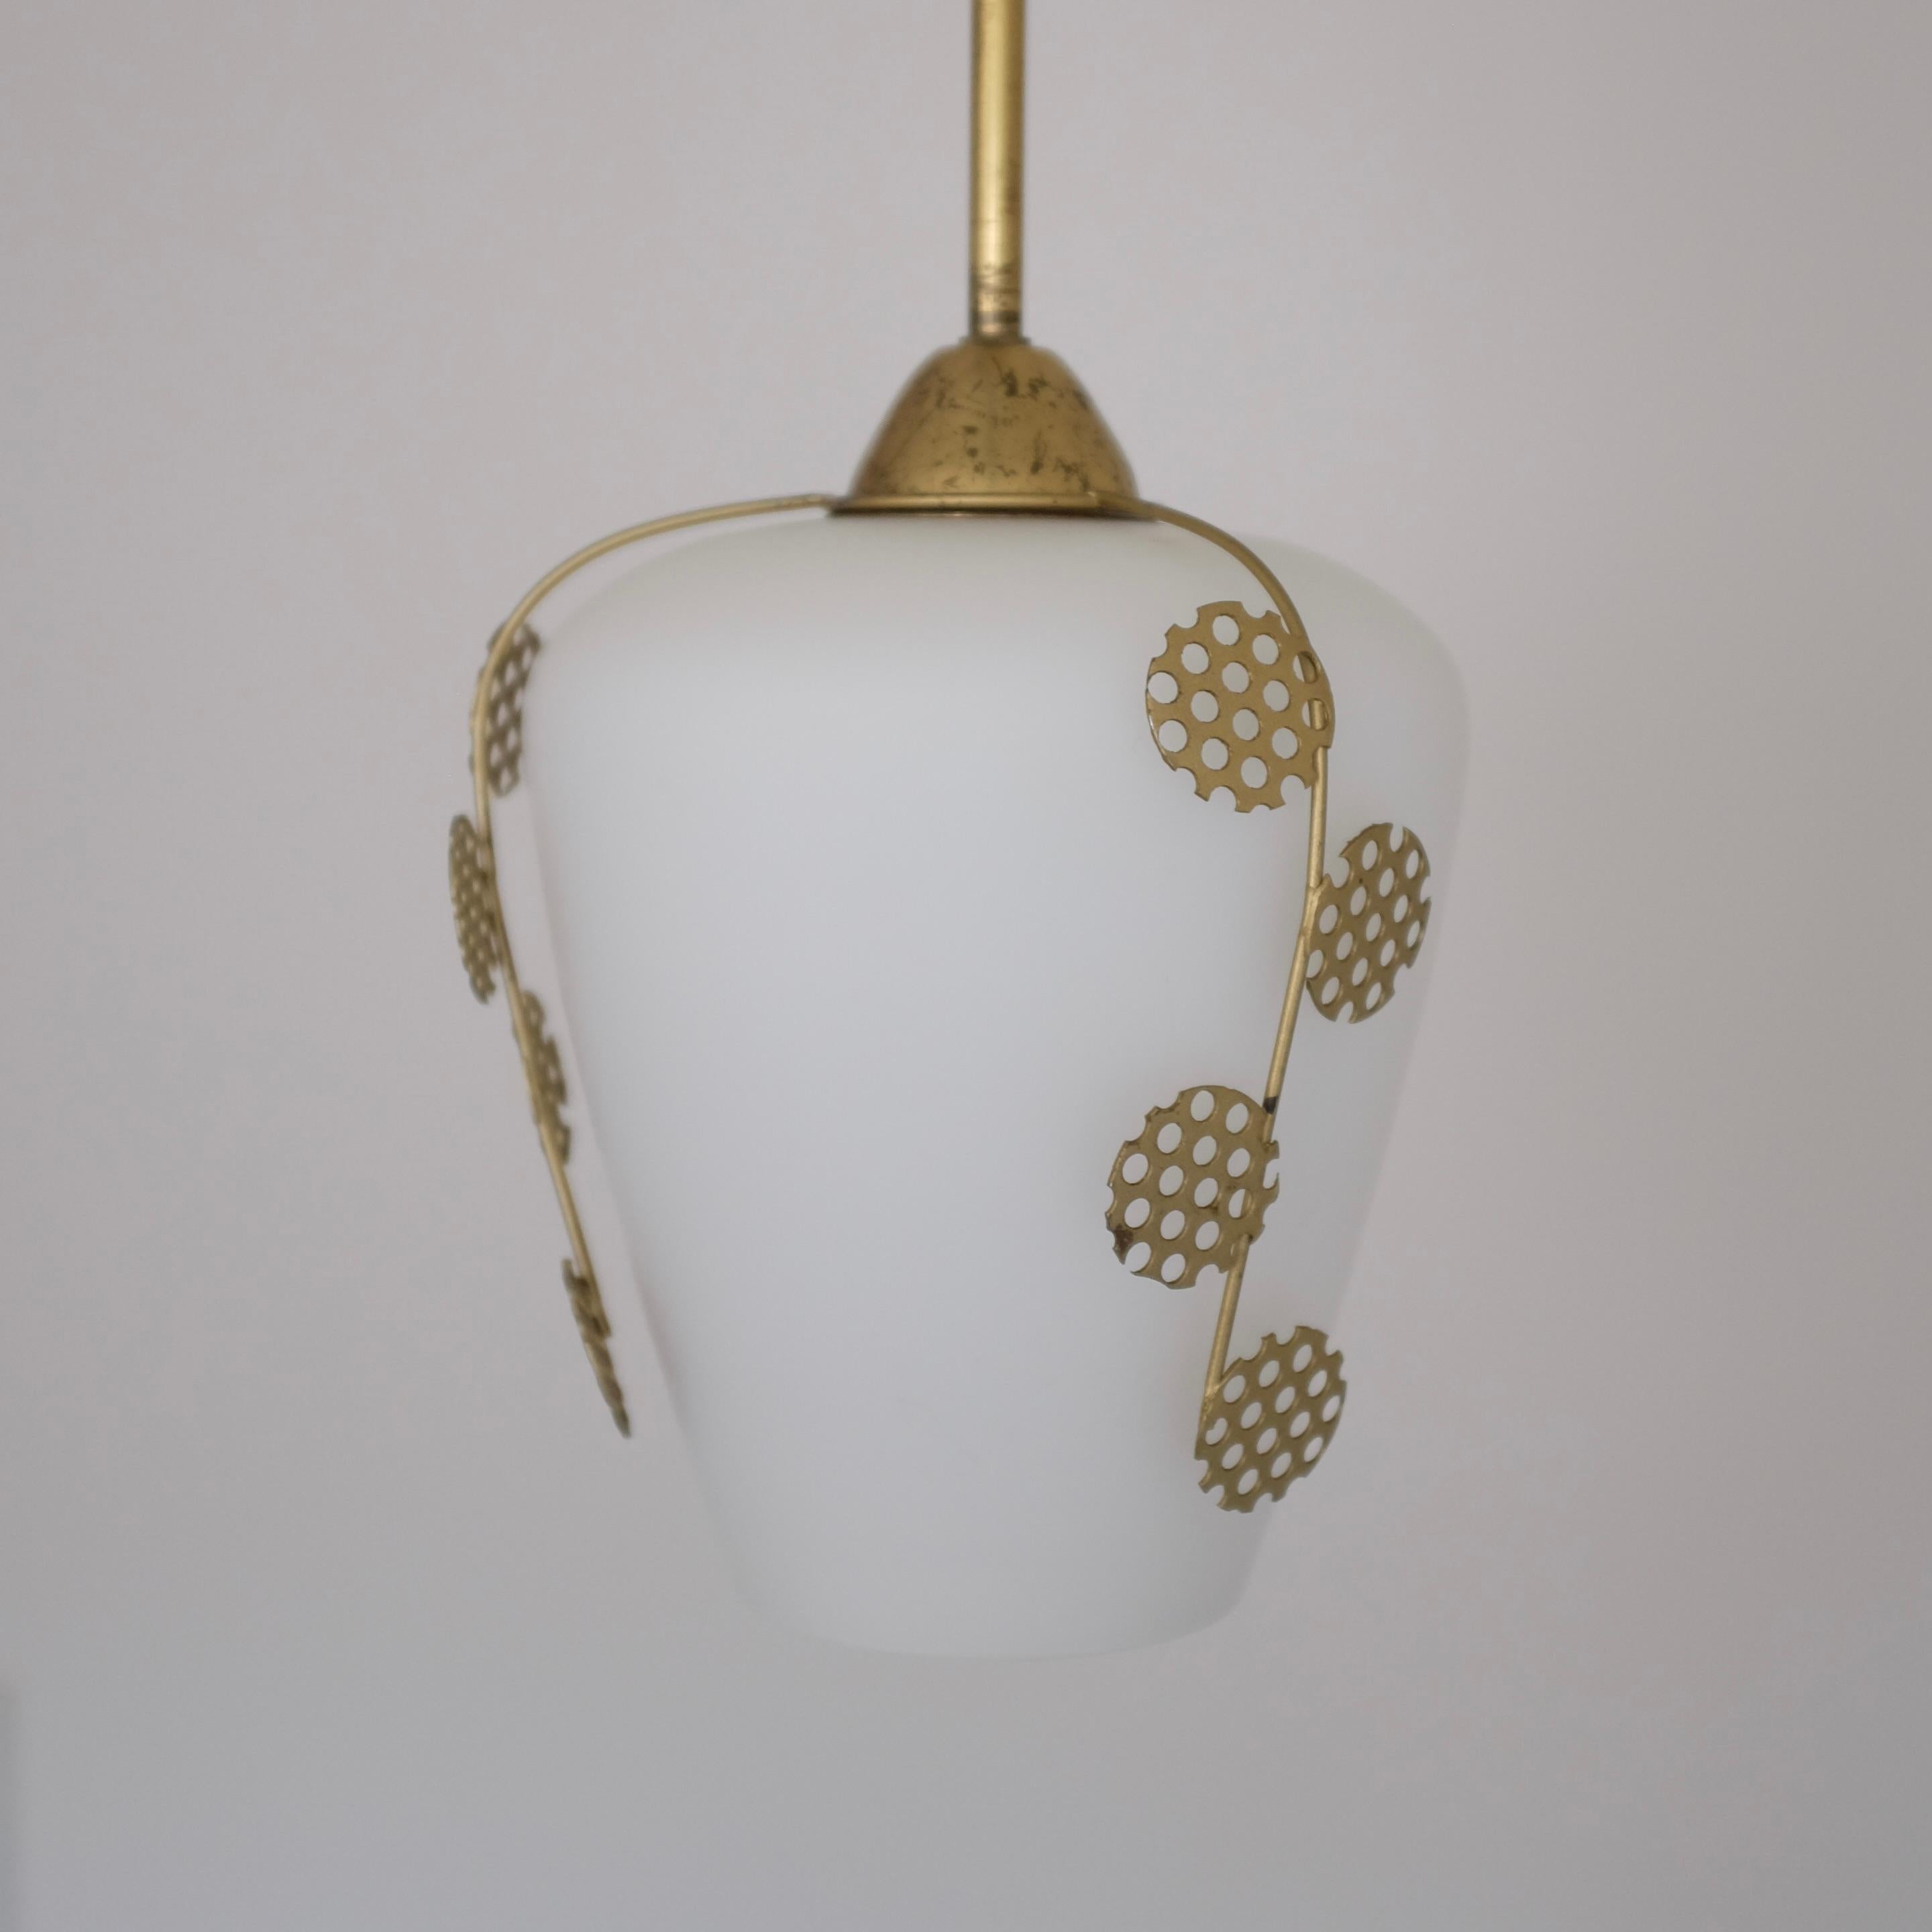 Swedish Modern light pendant with beautiful leaf ornament in brass and white frosted glass. Three decorative leaf ornaments stretches down the side of the glass lantern. Straight lamp arm and canopy in brass with age appropriate wear. There is a